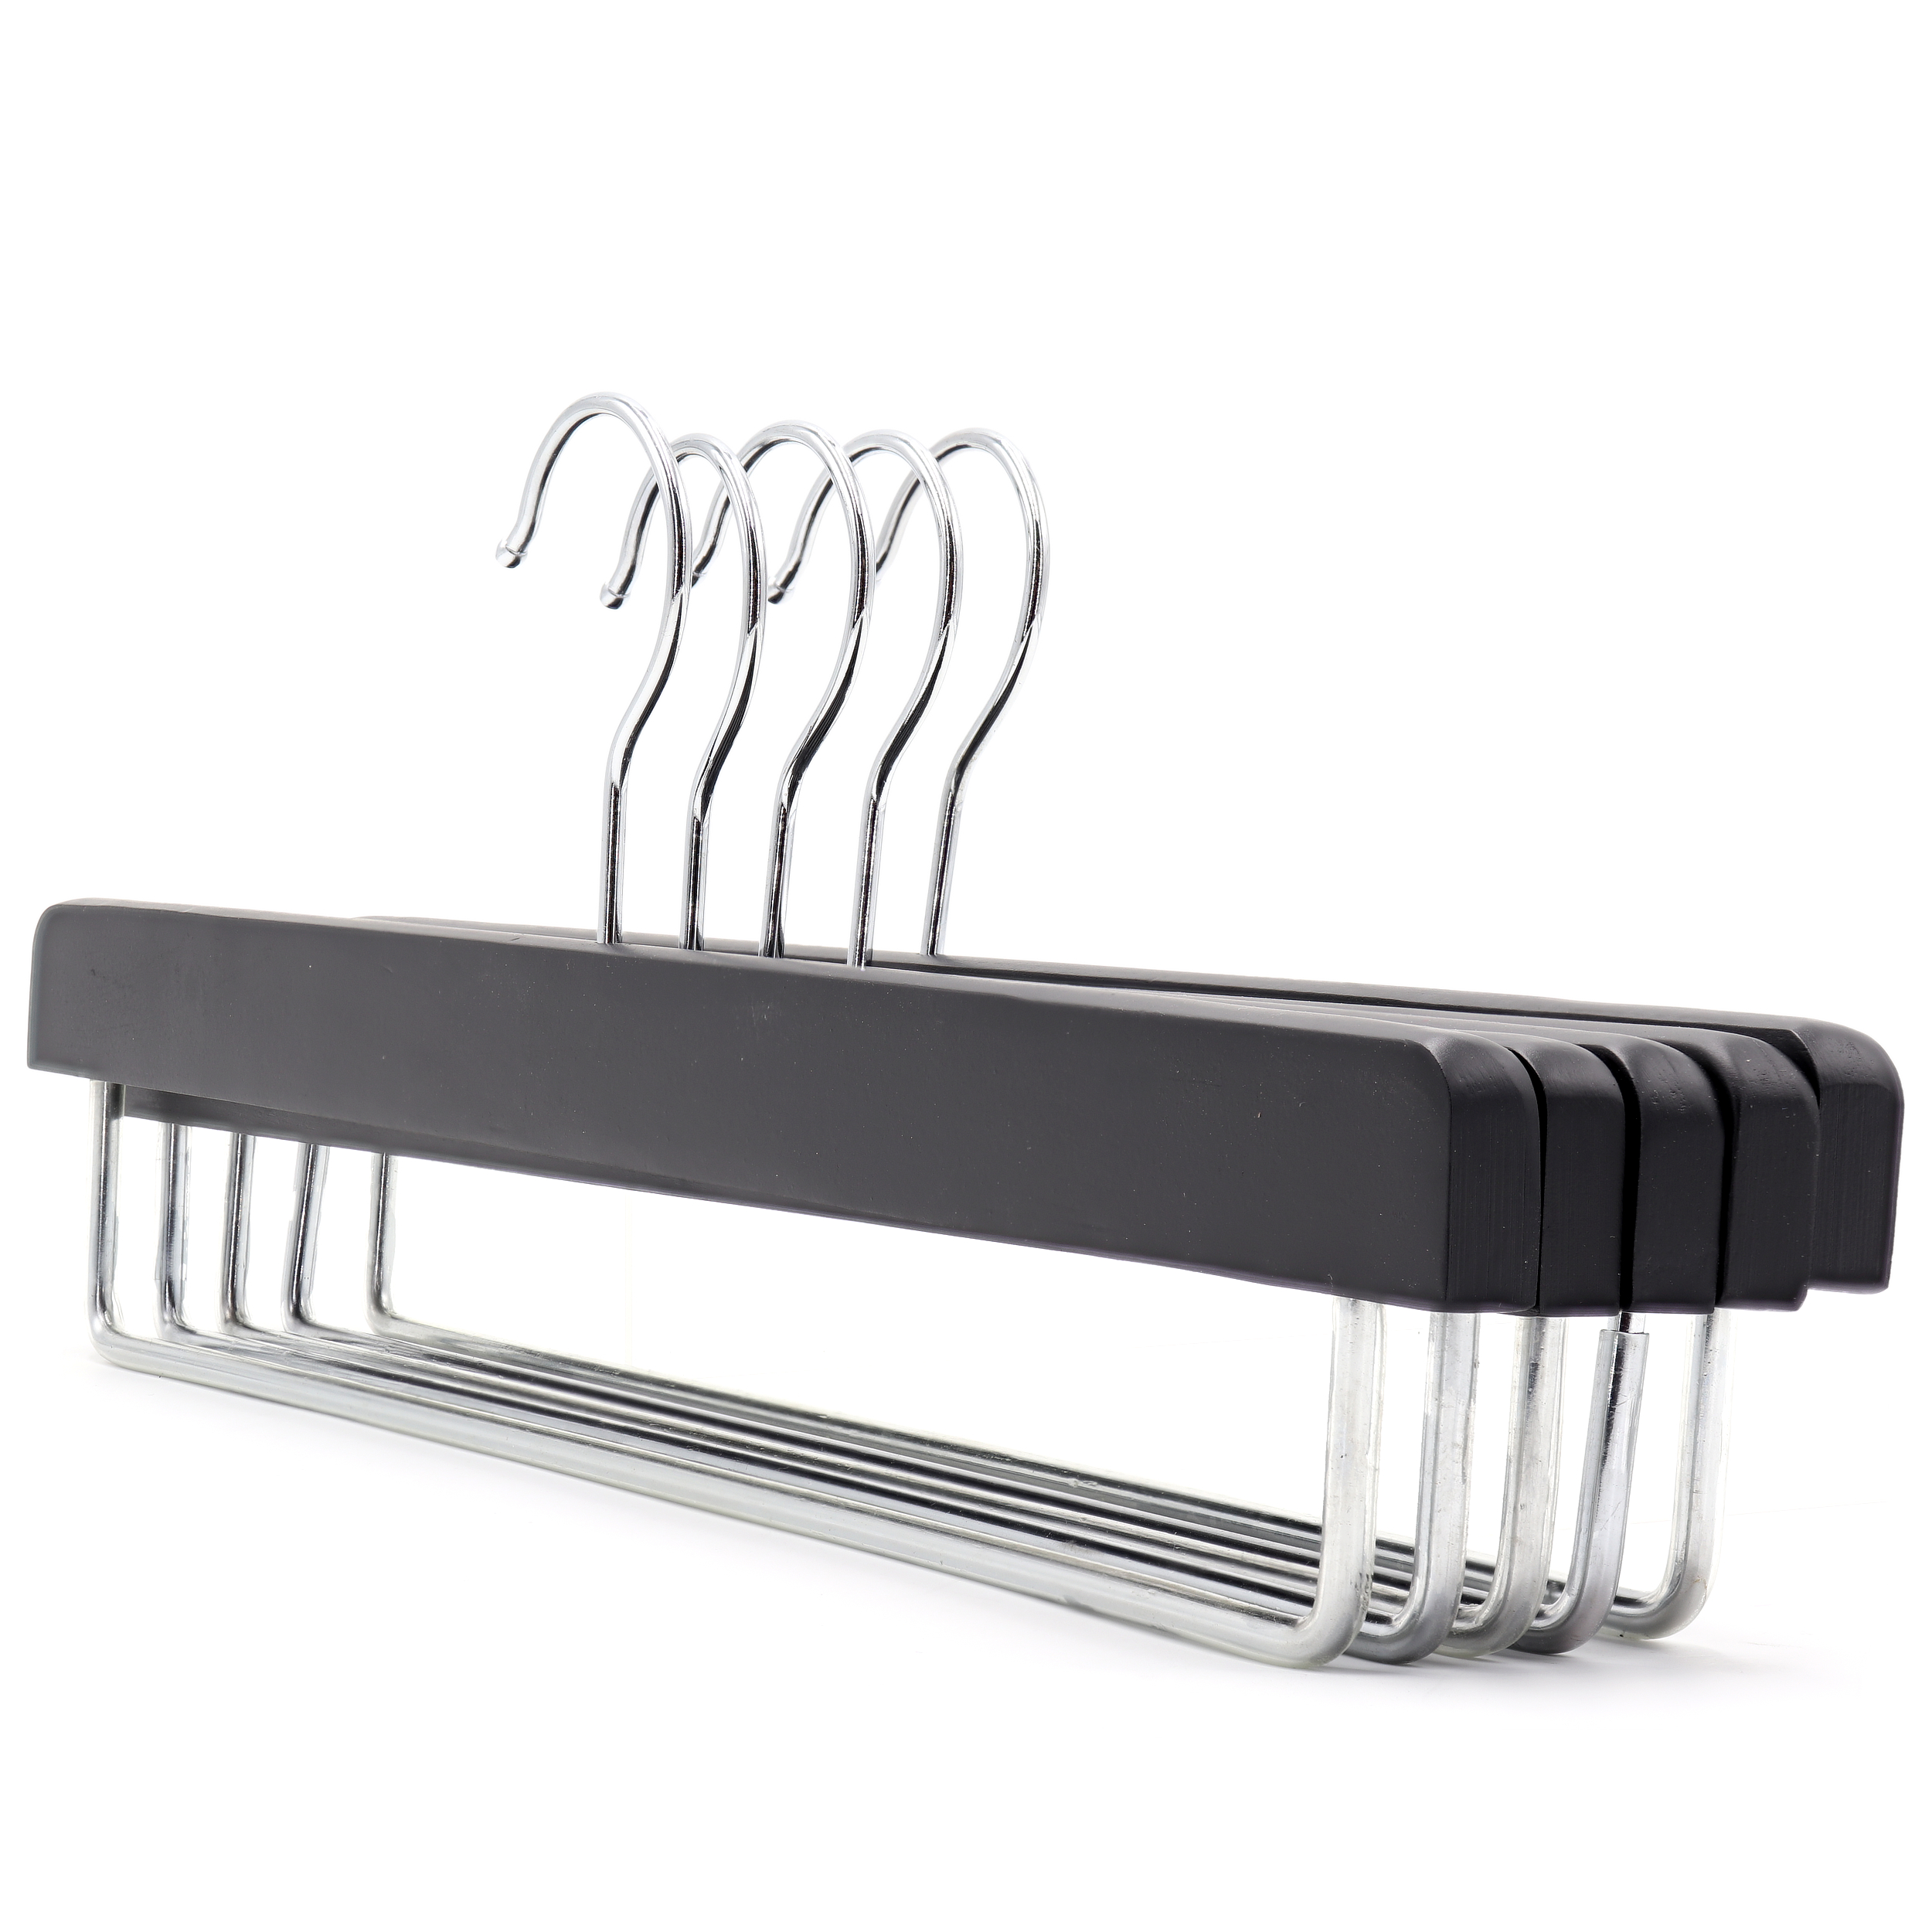 5-Pack Stainless Steel S Shaped Pants Hangers - Non-Slip Space Saving  Trouser Hangers | Fruugo NO